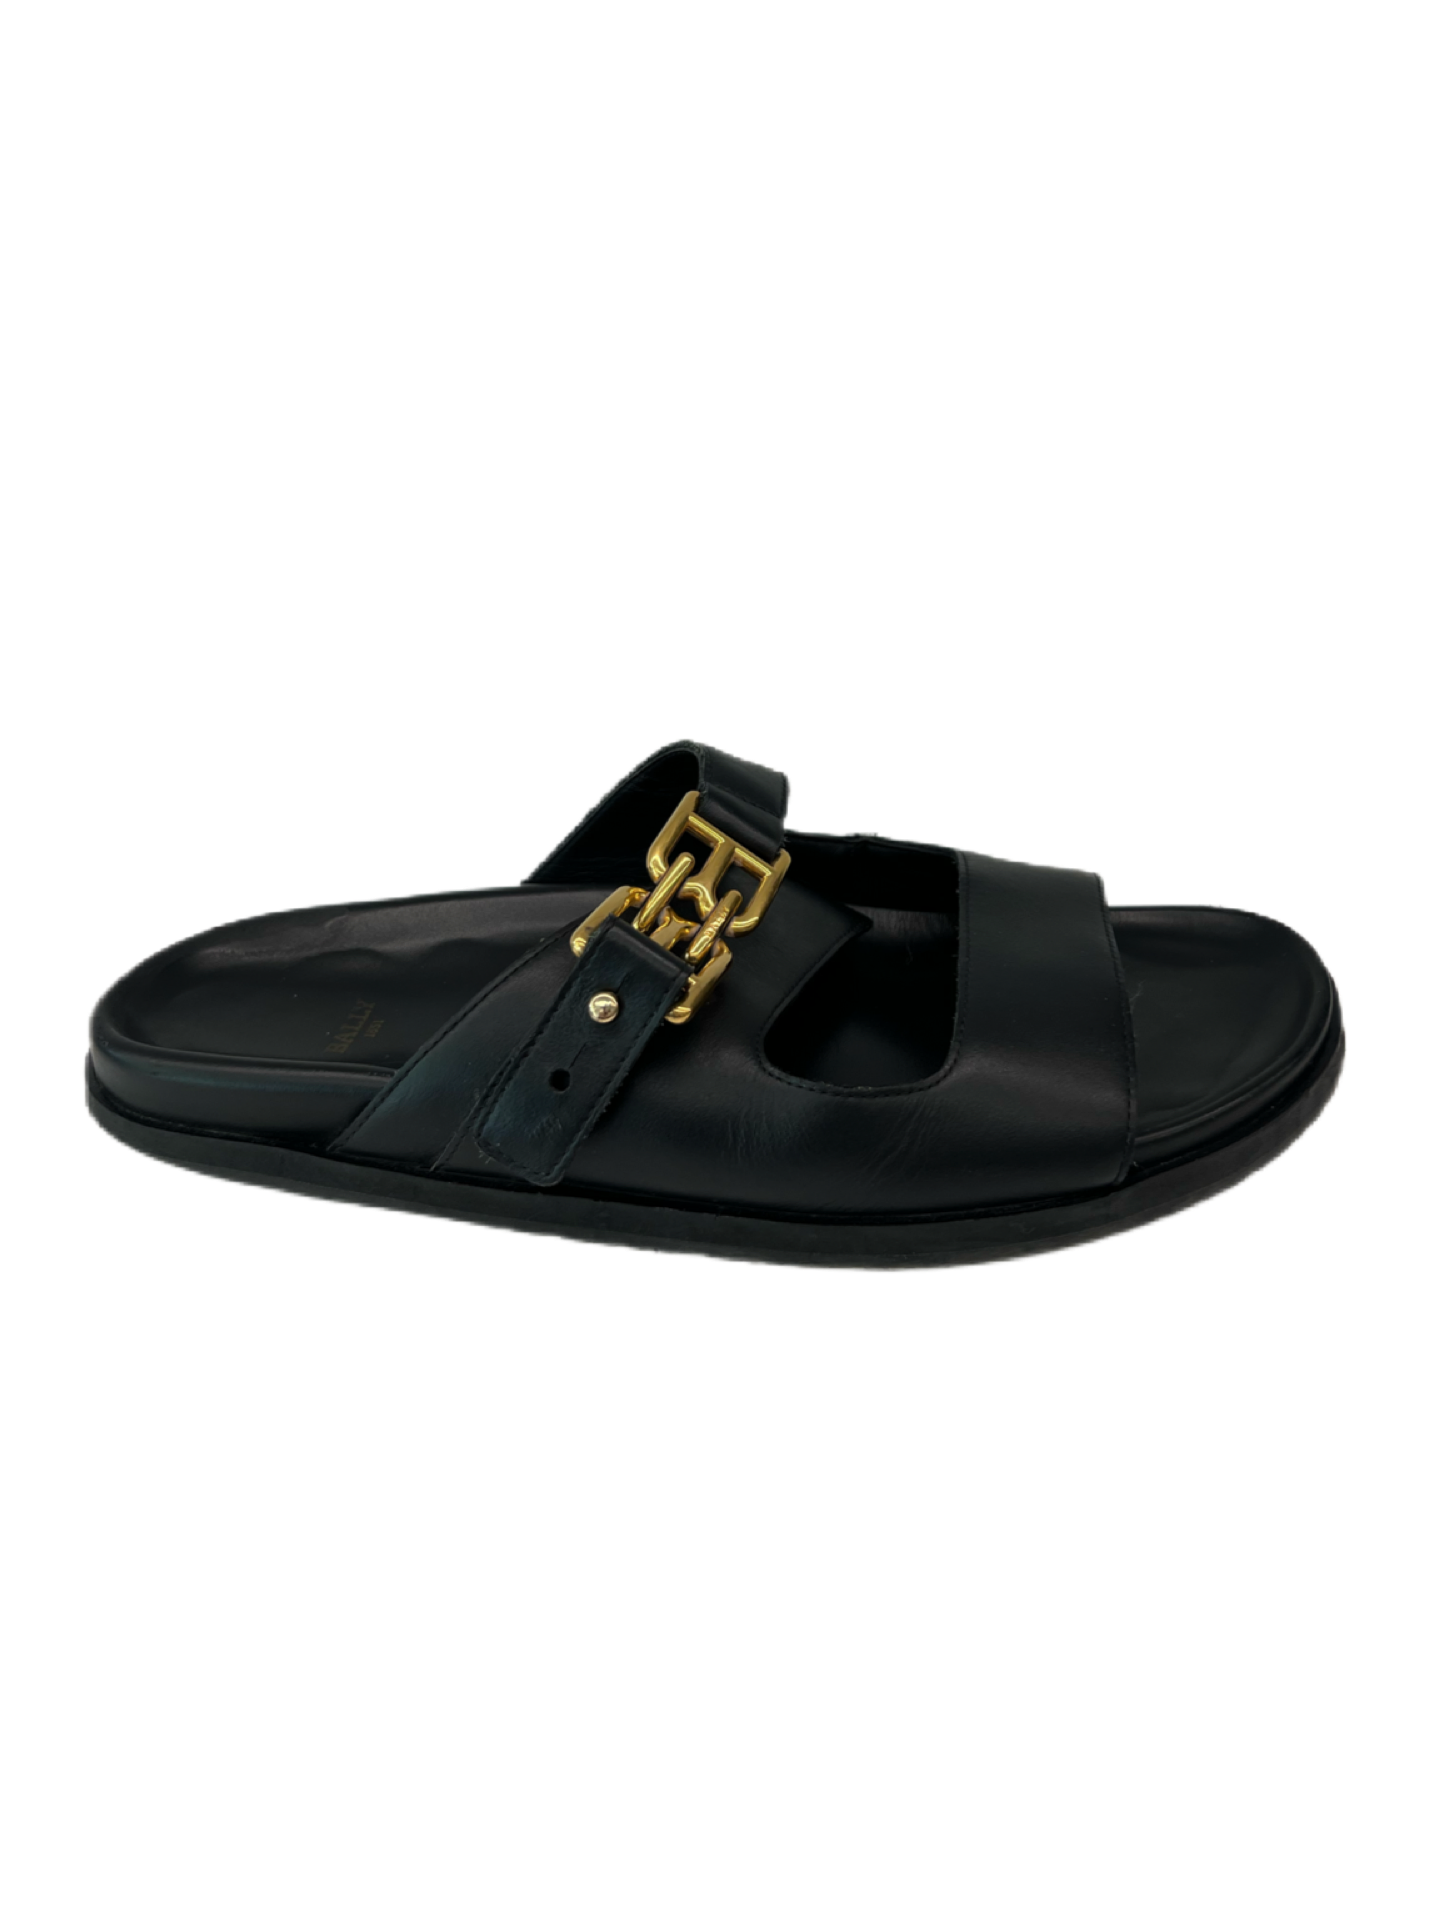 Bally Black Double Strap BB Gold Link Sandals. Size: 41